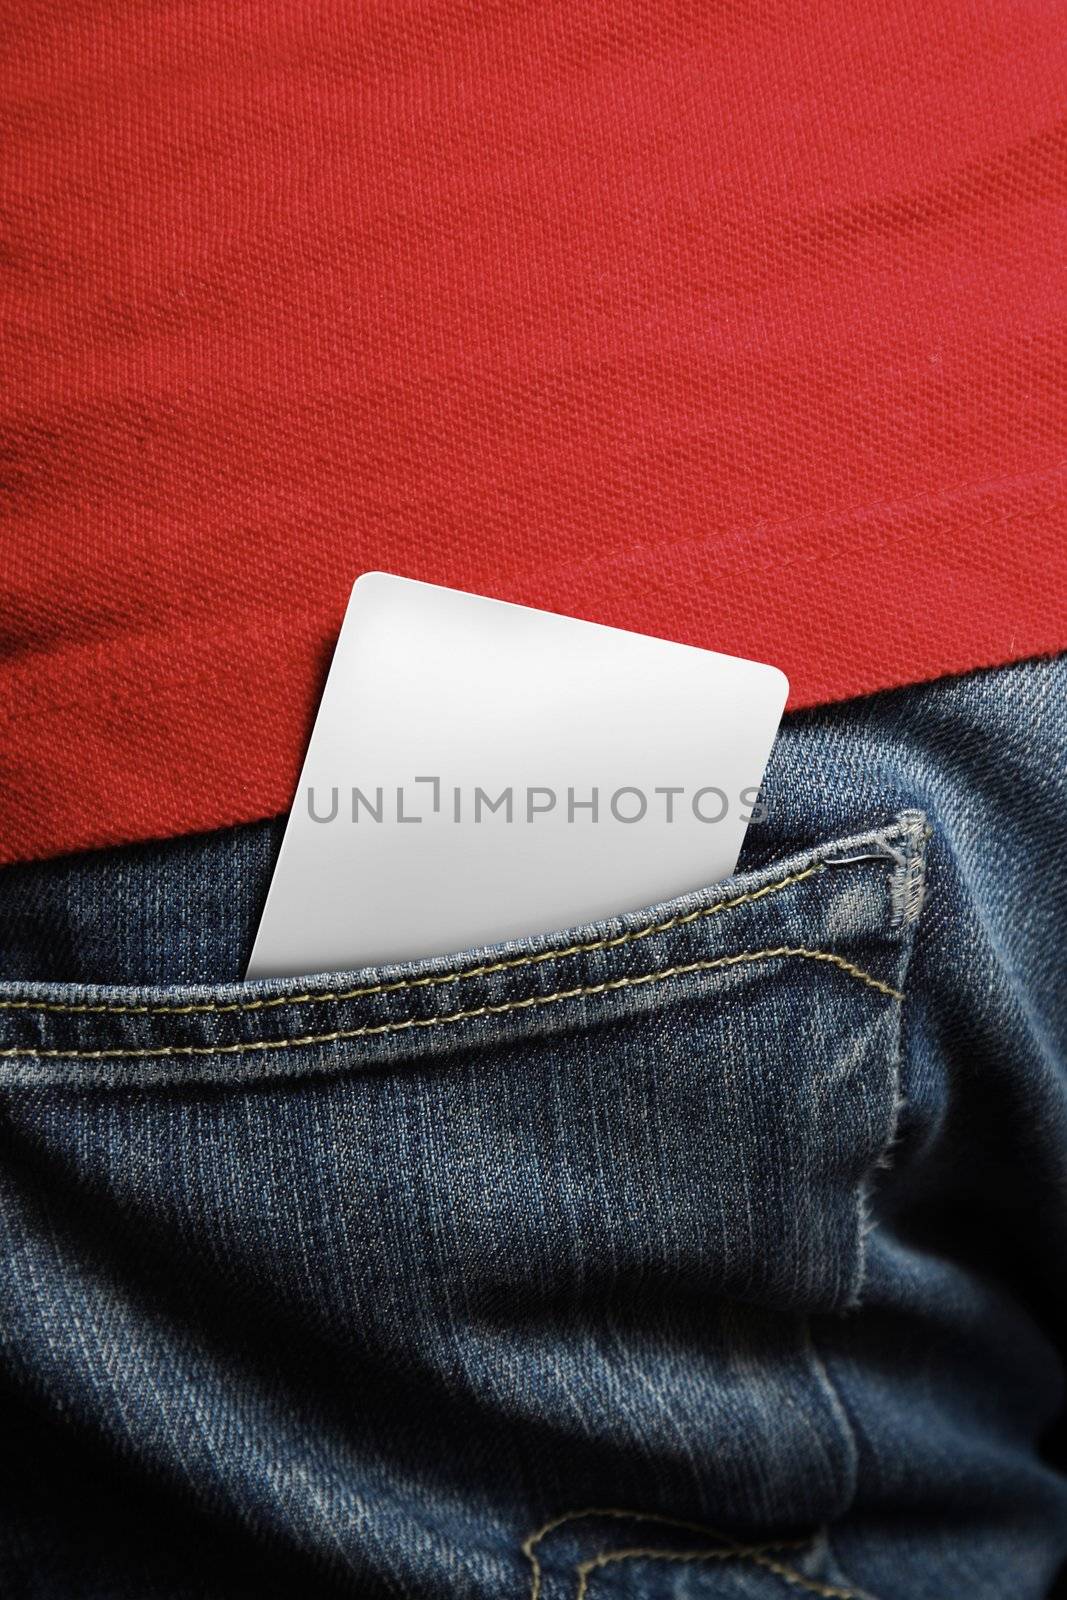 Blank card in a mans back pocket - insert your own design for any card design such as school, member, club, credit or debit cards